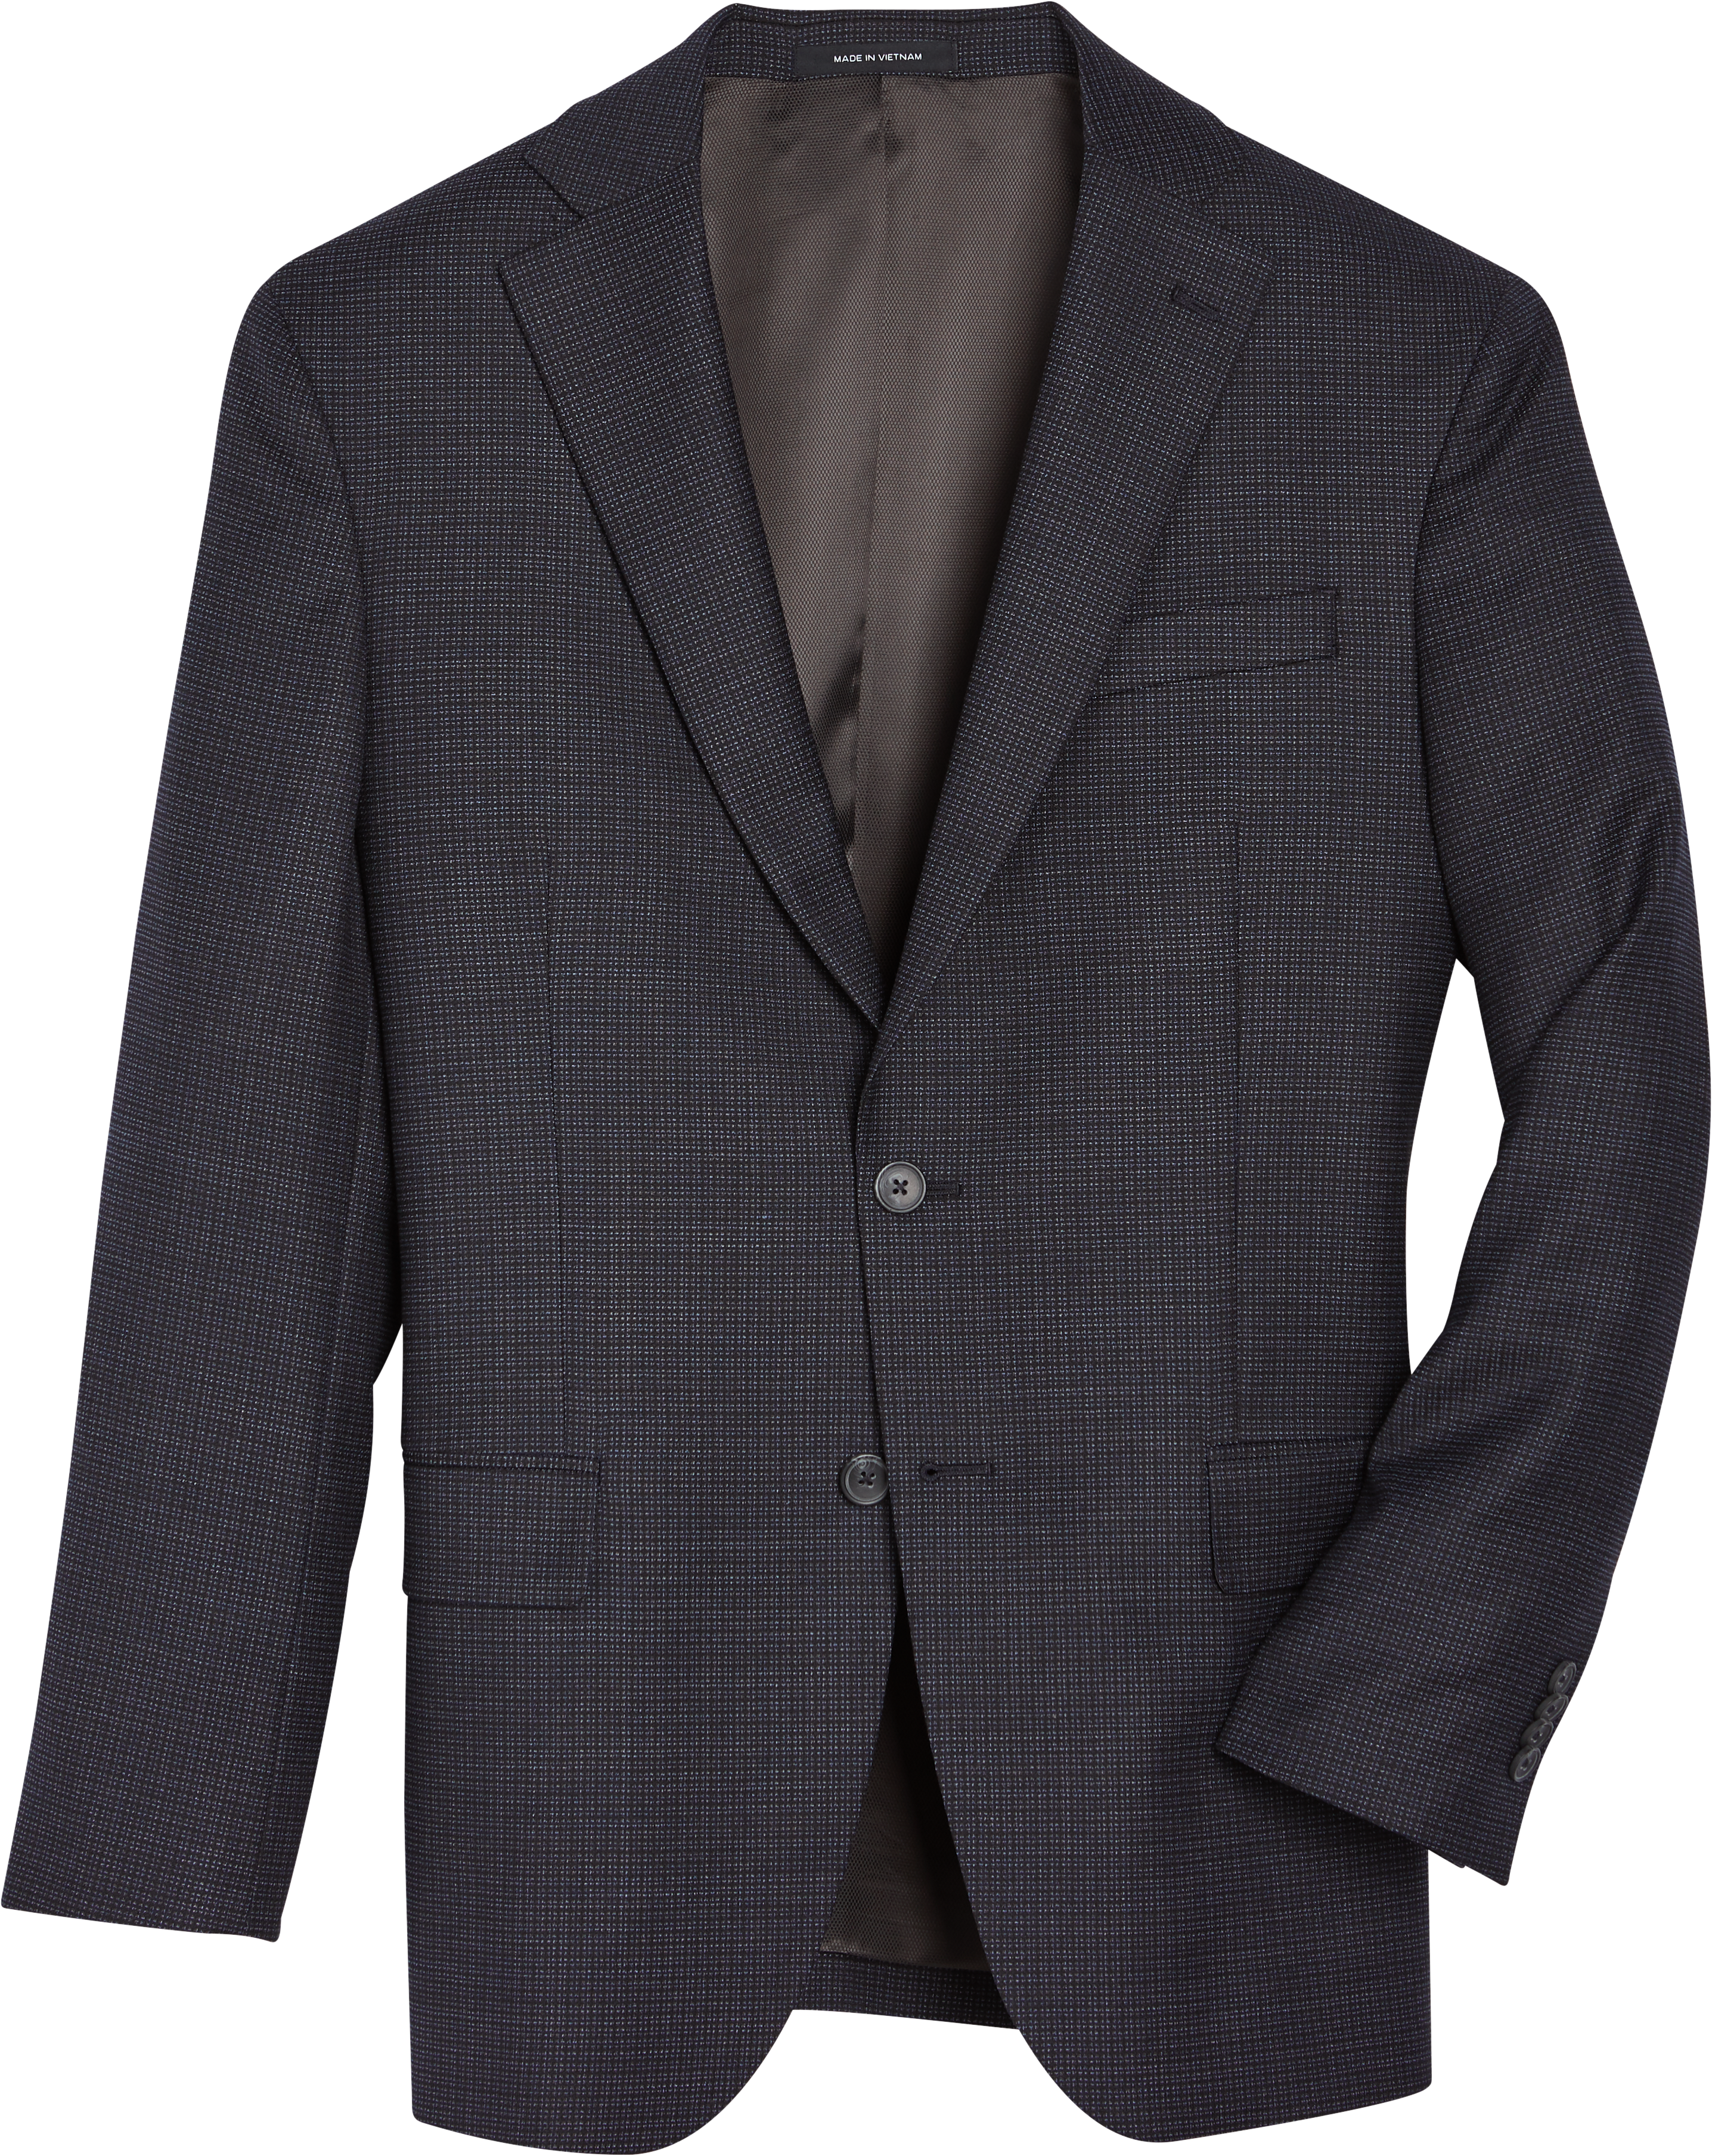 Awearness Kenneth Cole Brown Check Slim Fit Sport Coat Mens Sale Mens Wearhouse